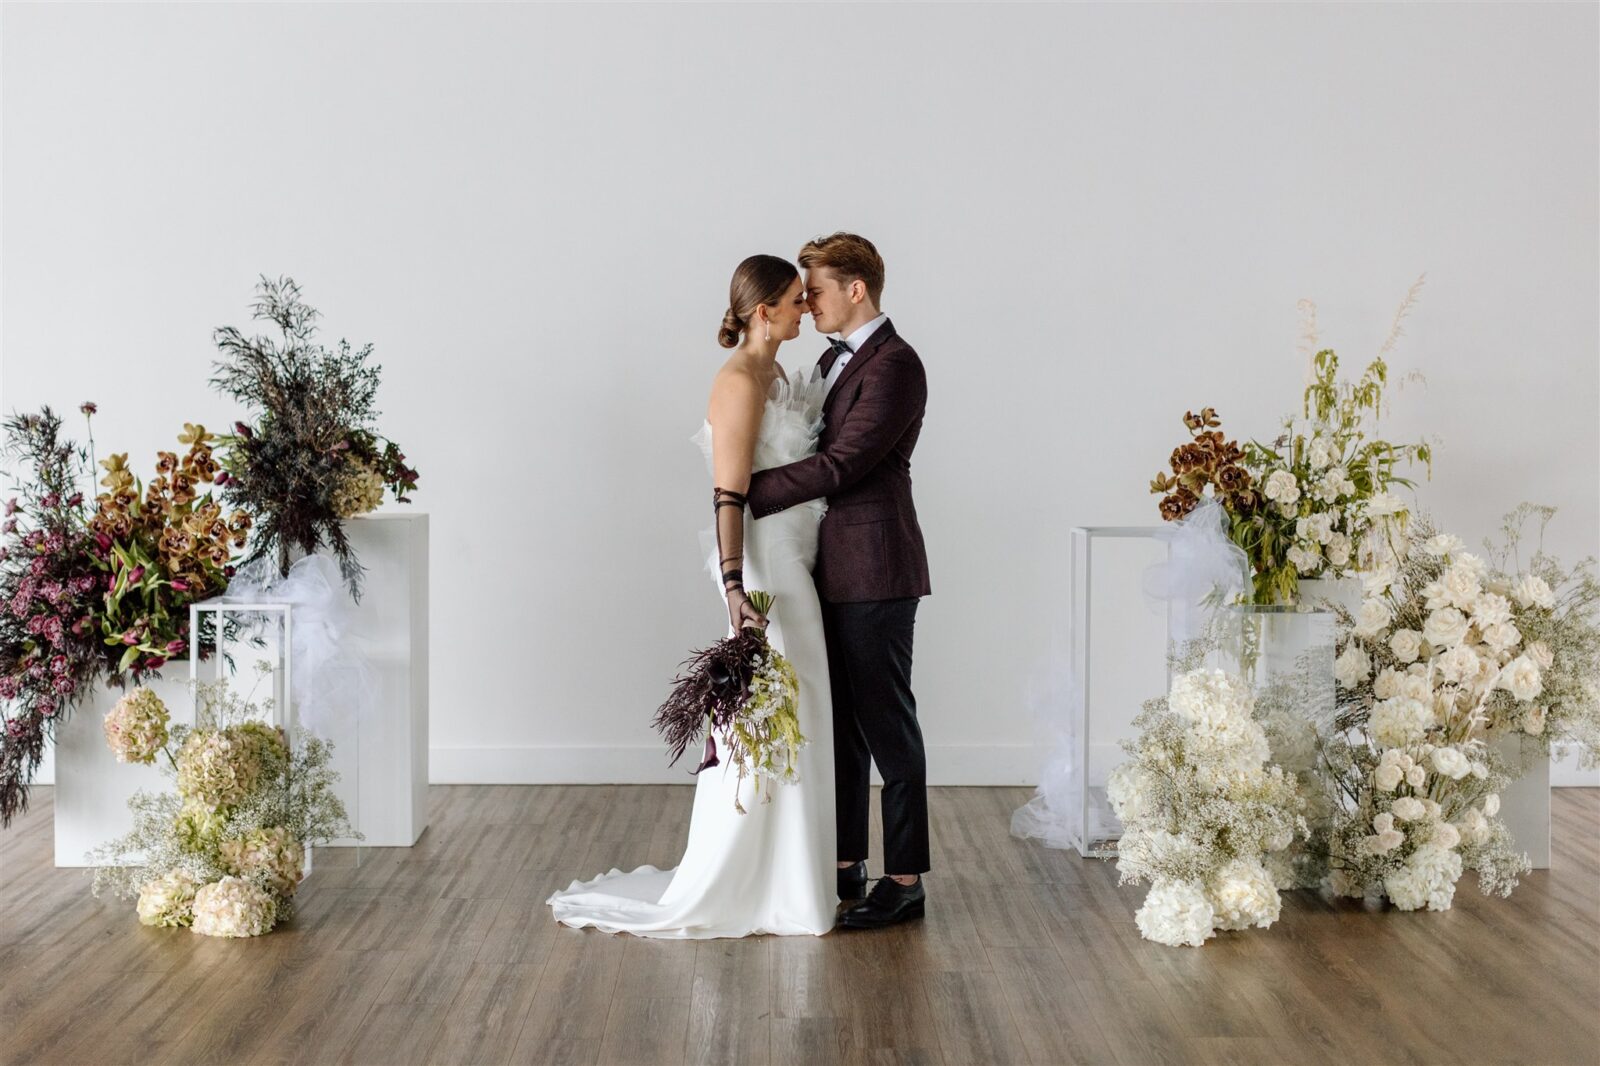 Industrial Chic Meets Modern Elegance In This Vancouver Wedding Inspiration | Bronte Bride